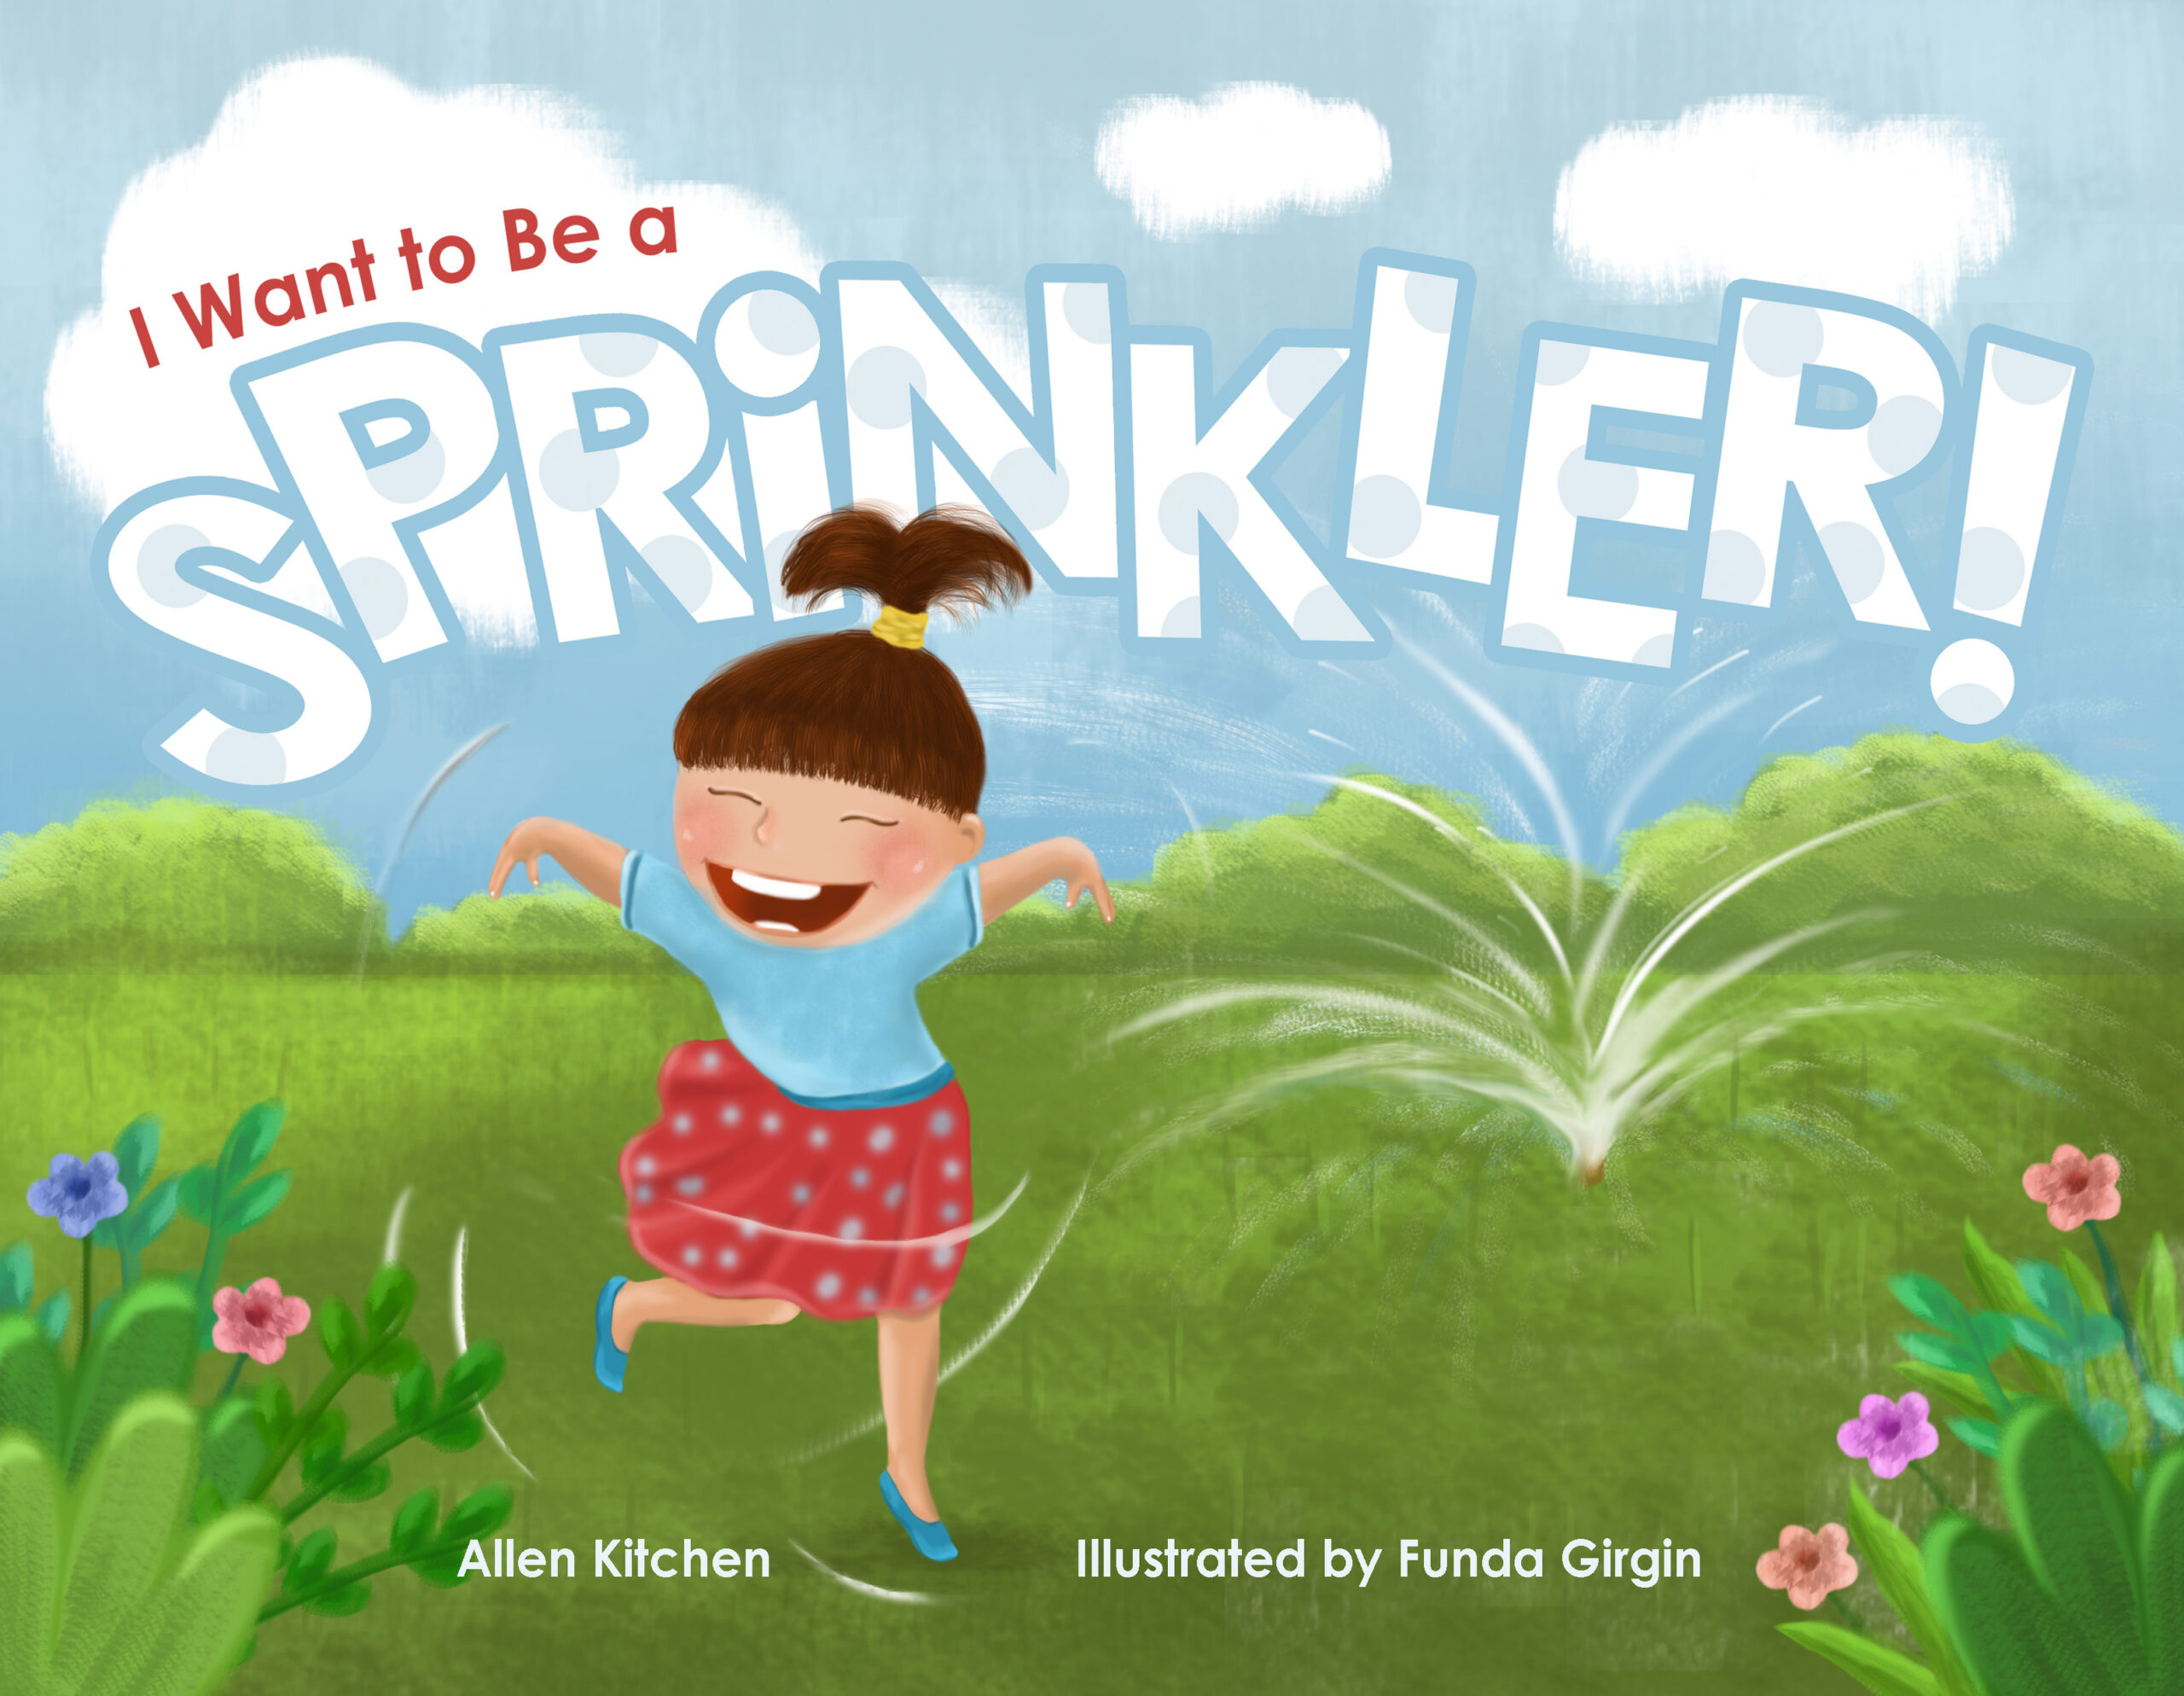 FREE: I Want To Be a Sprinkler by Allen Kitchen